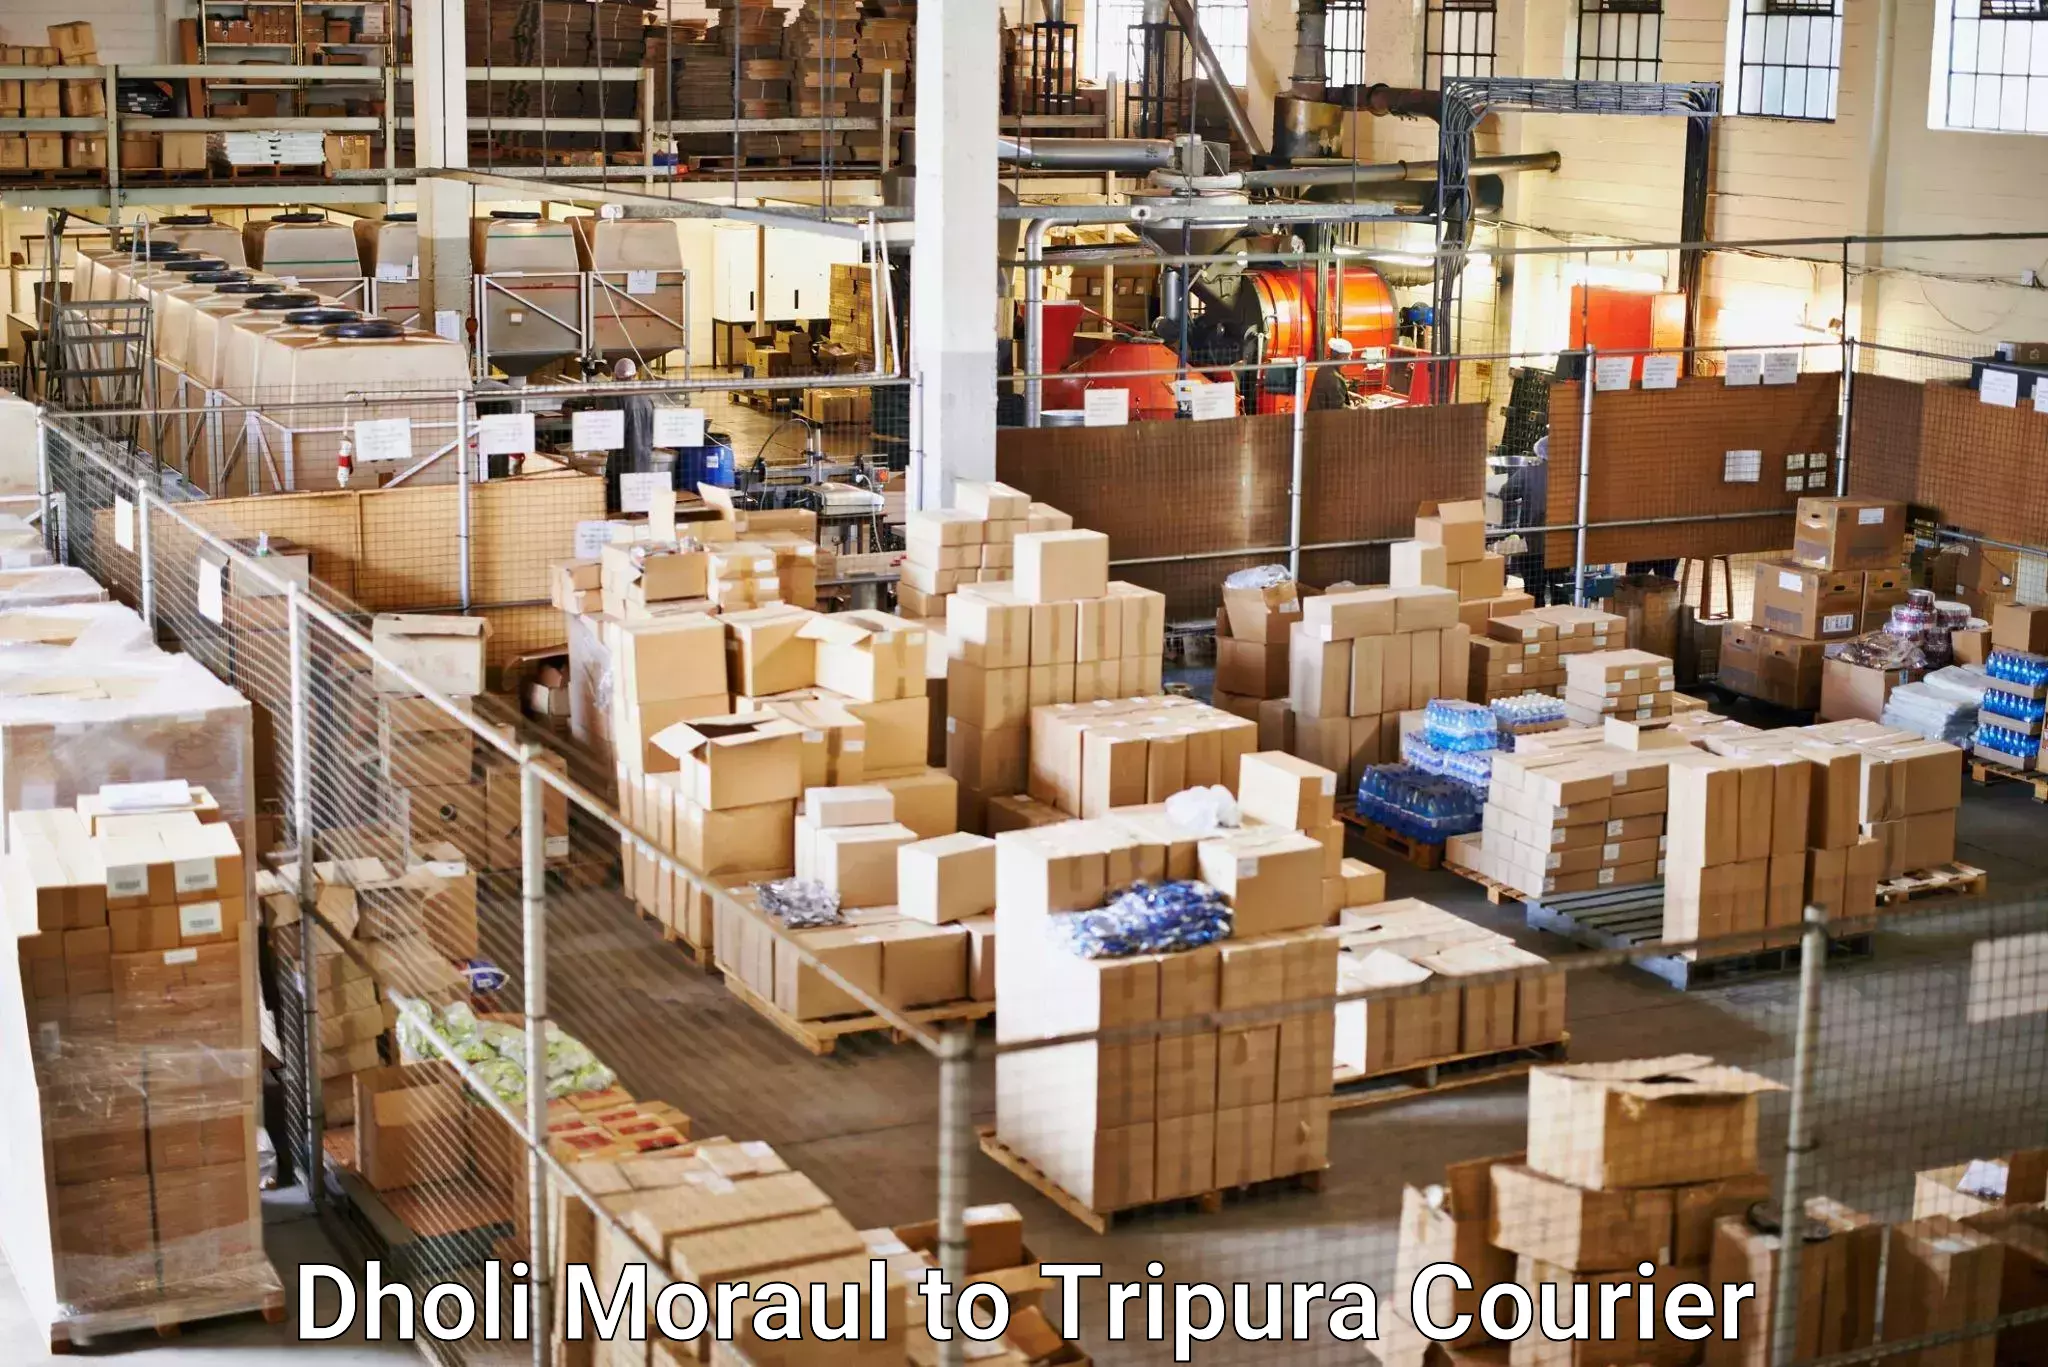 Holiday shipping services Dholi Moraul to Udaipur Tripura